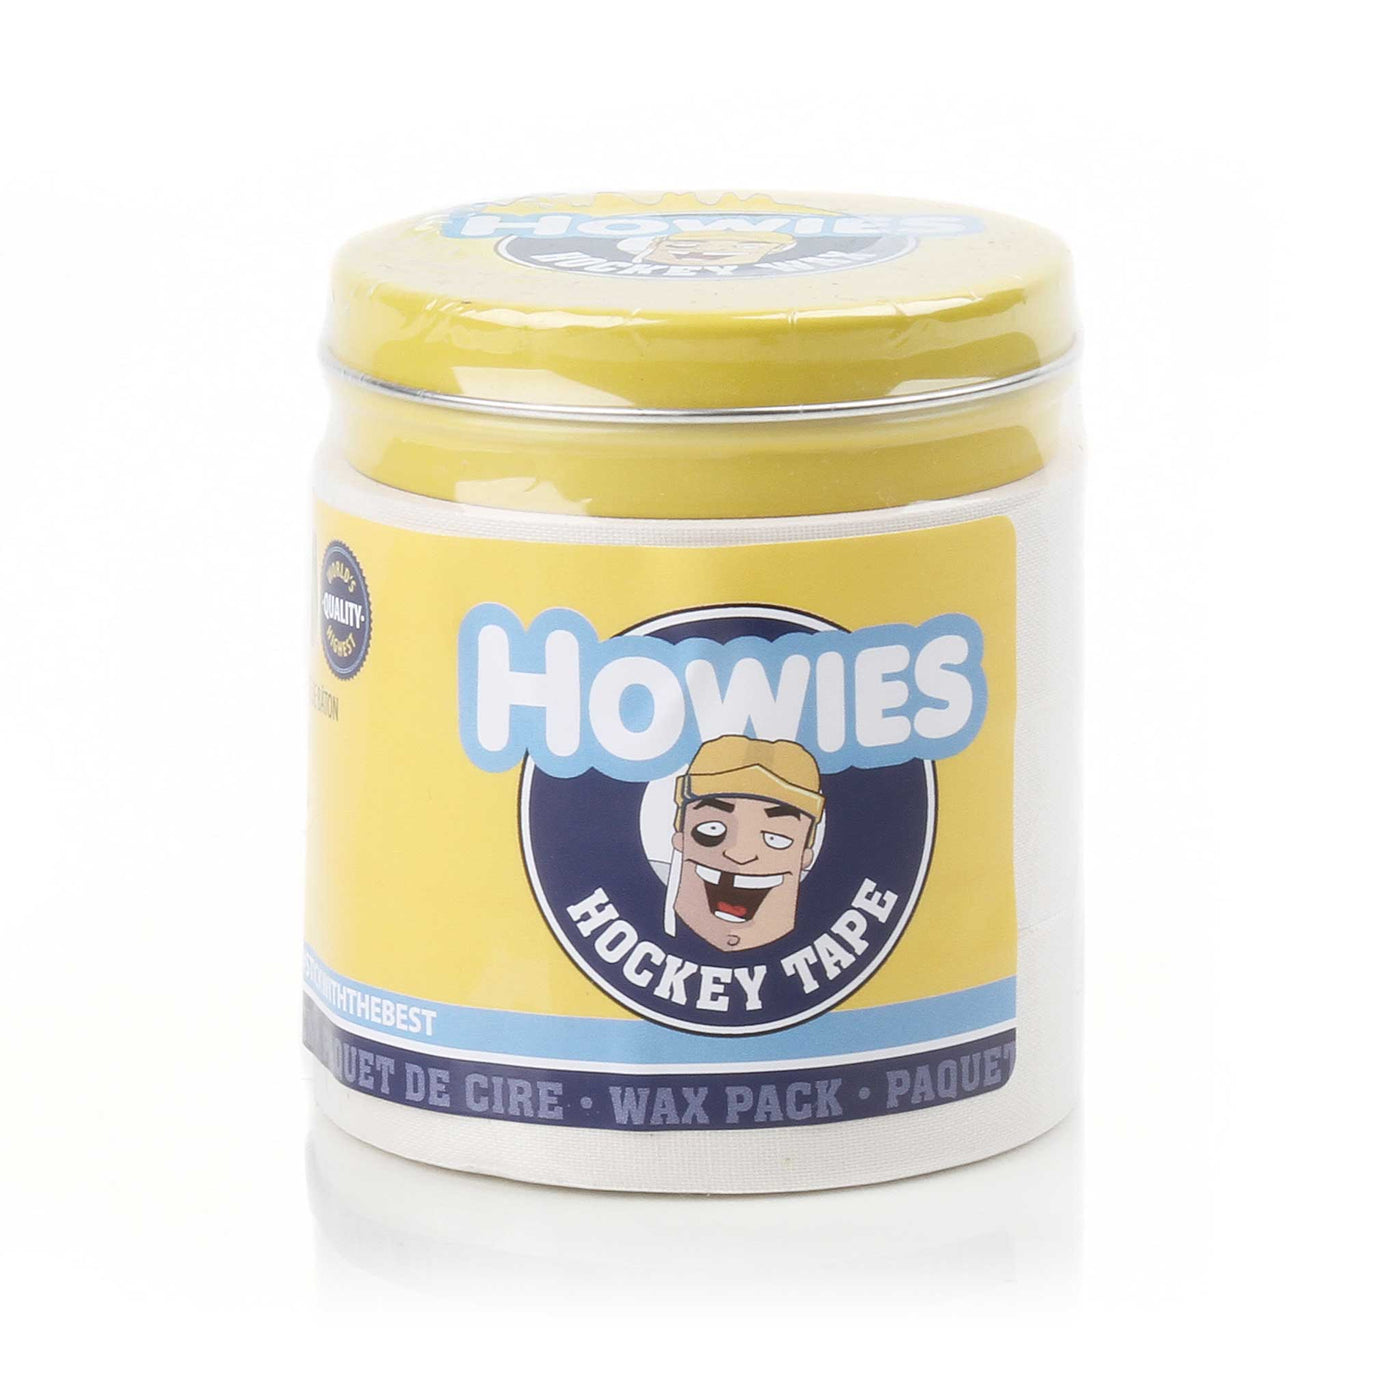 Howies Tape & Wax - White